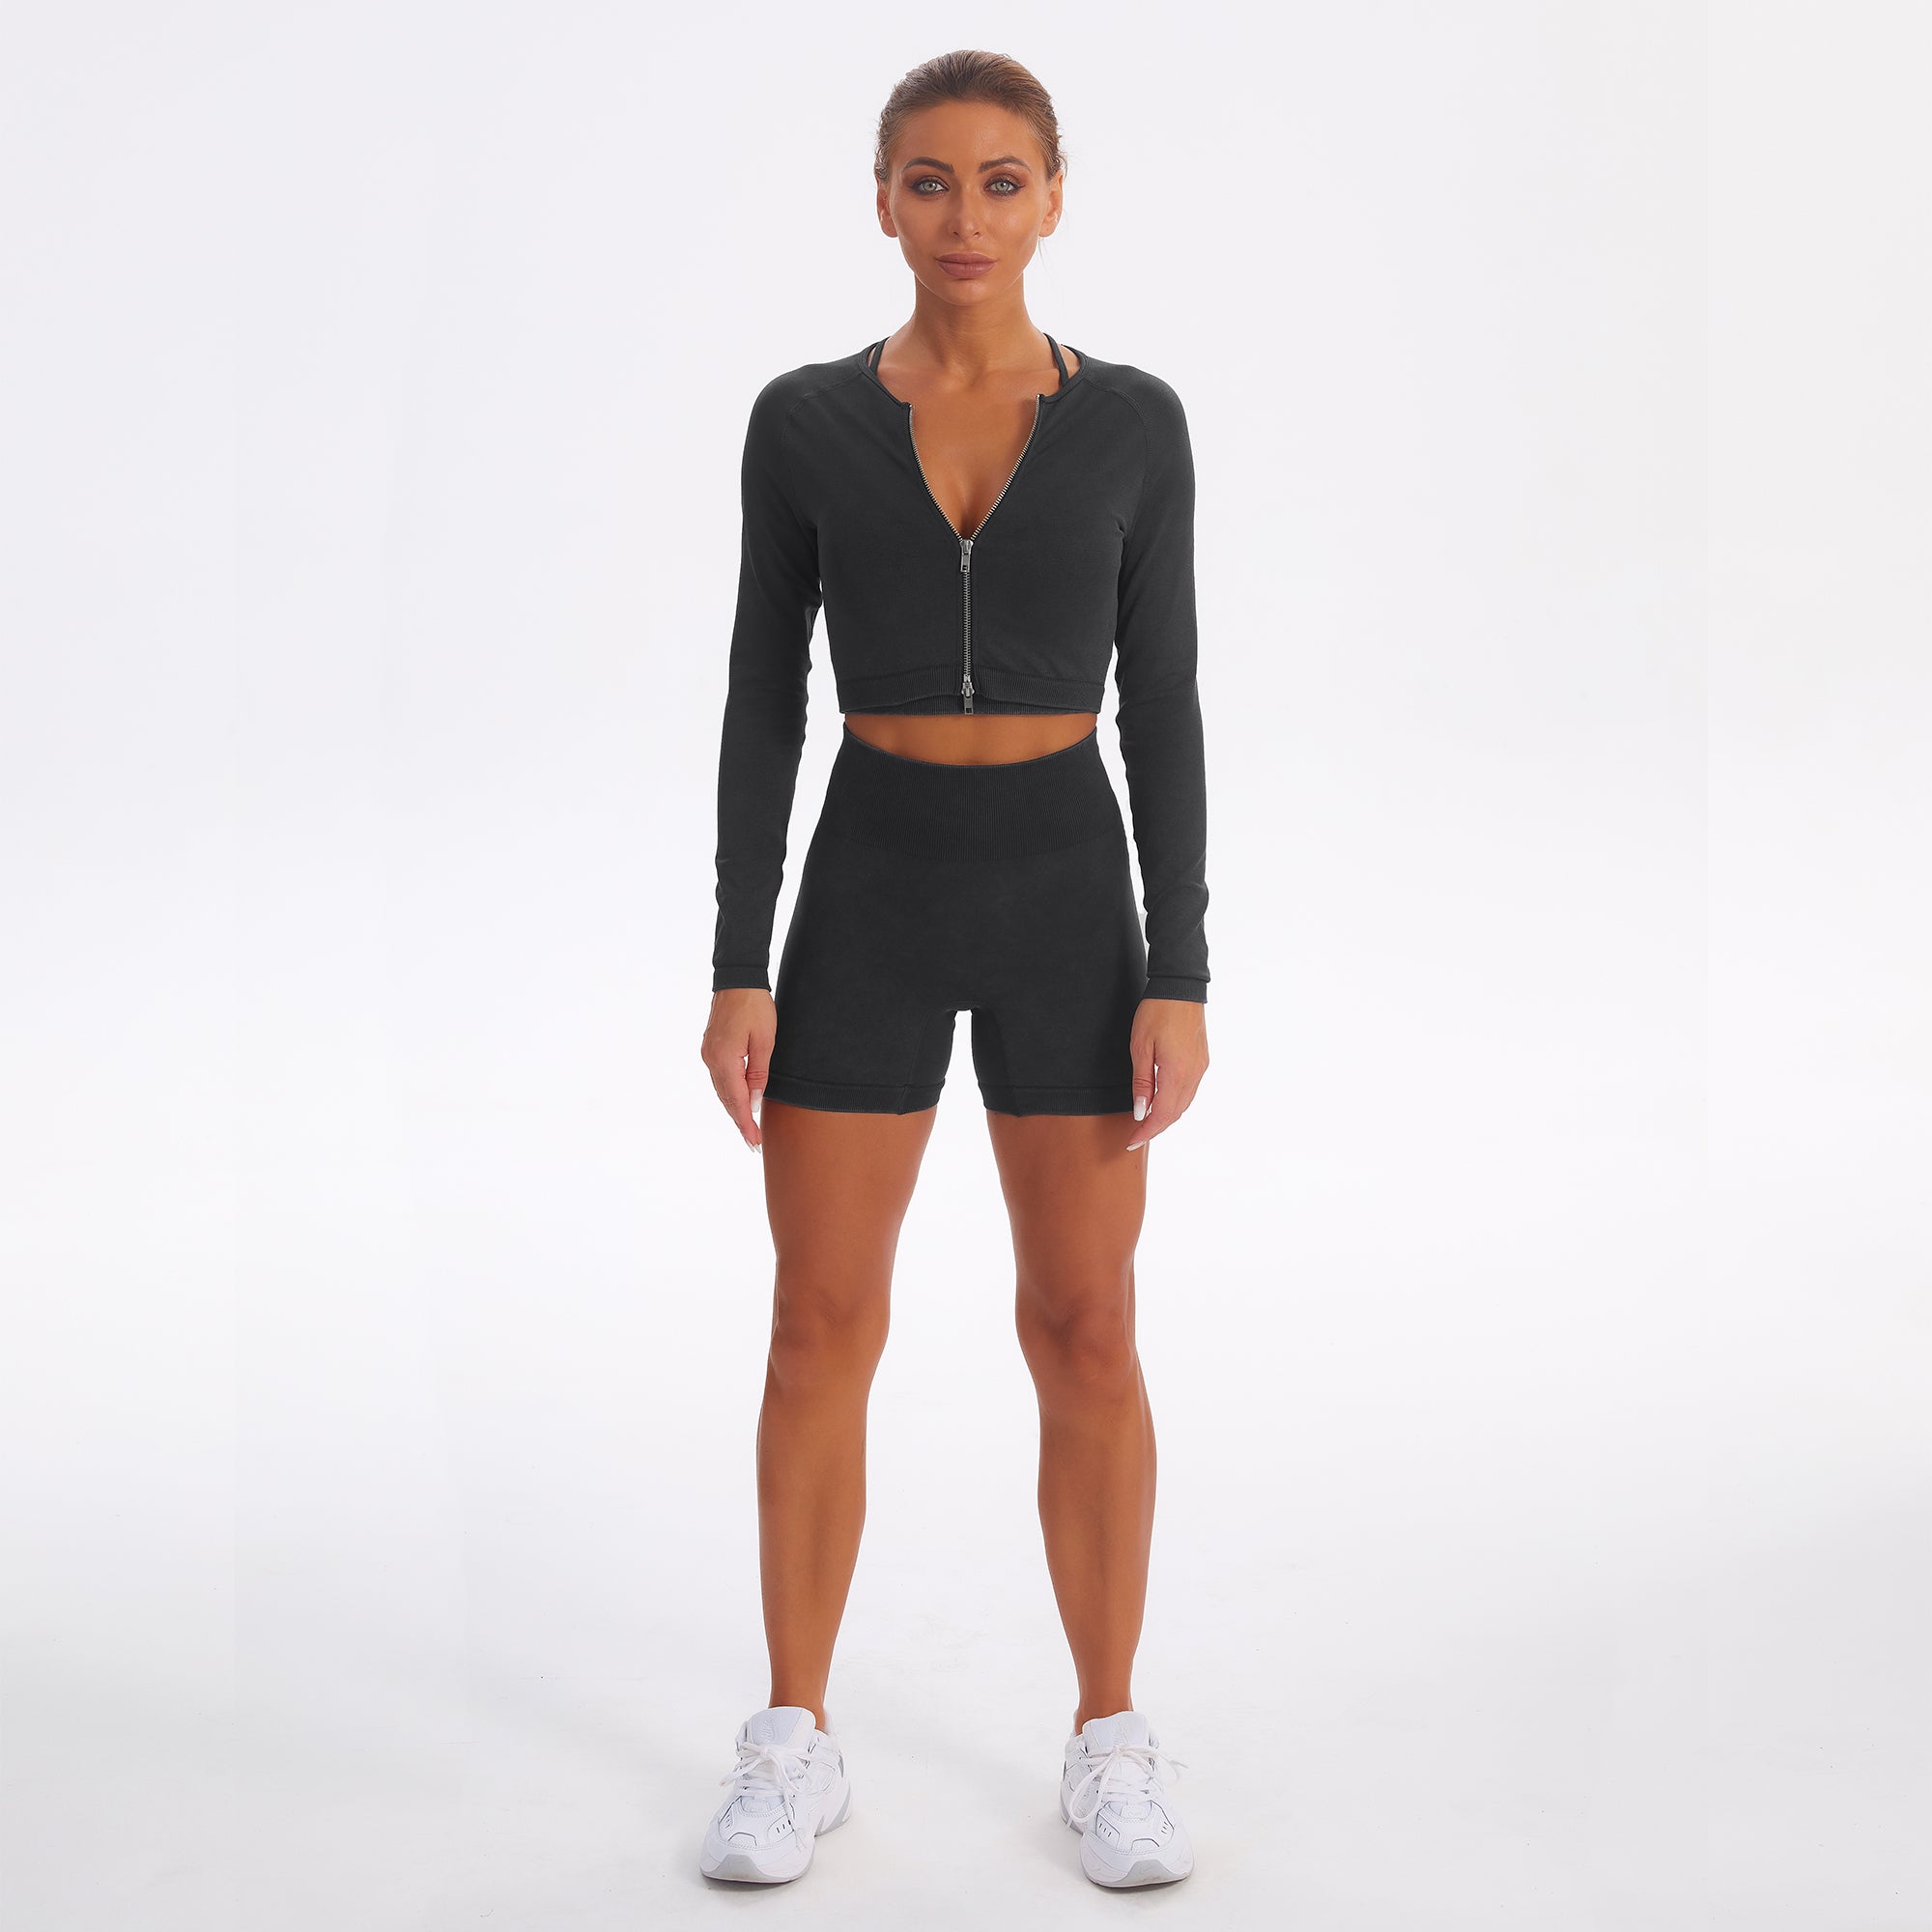 Seamless Sports Yoga Workout Clothes Long Sleeve Shorts Suit Women